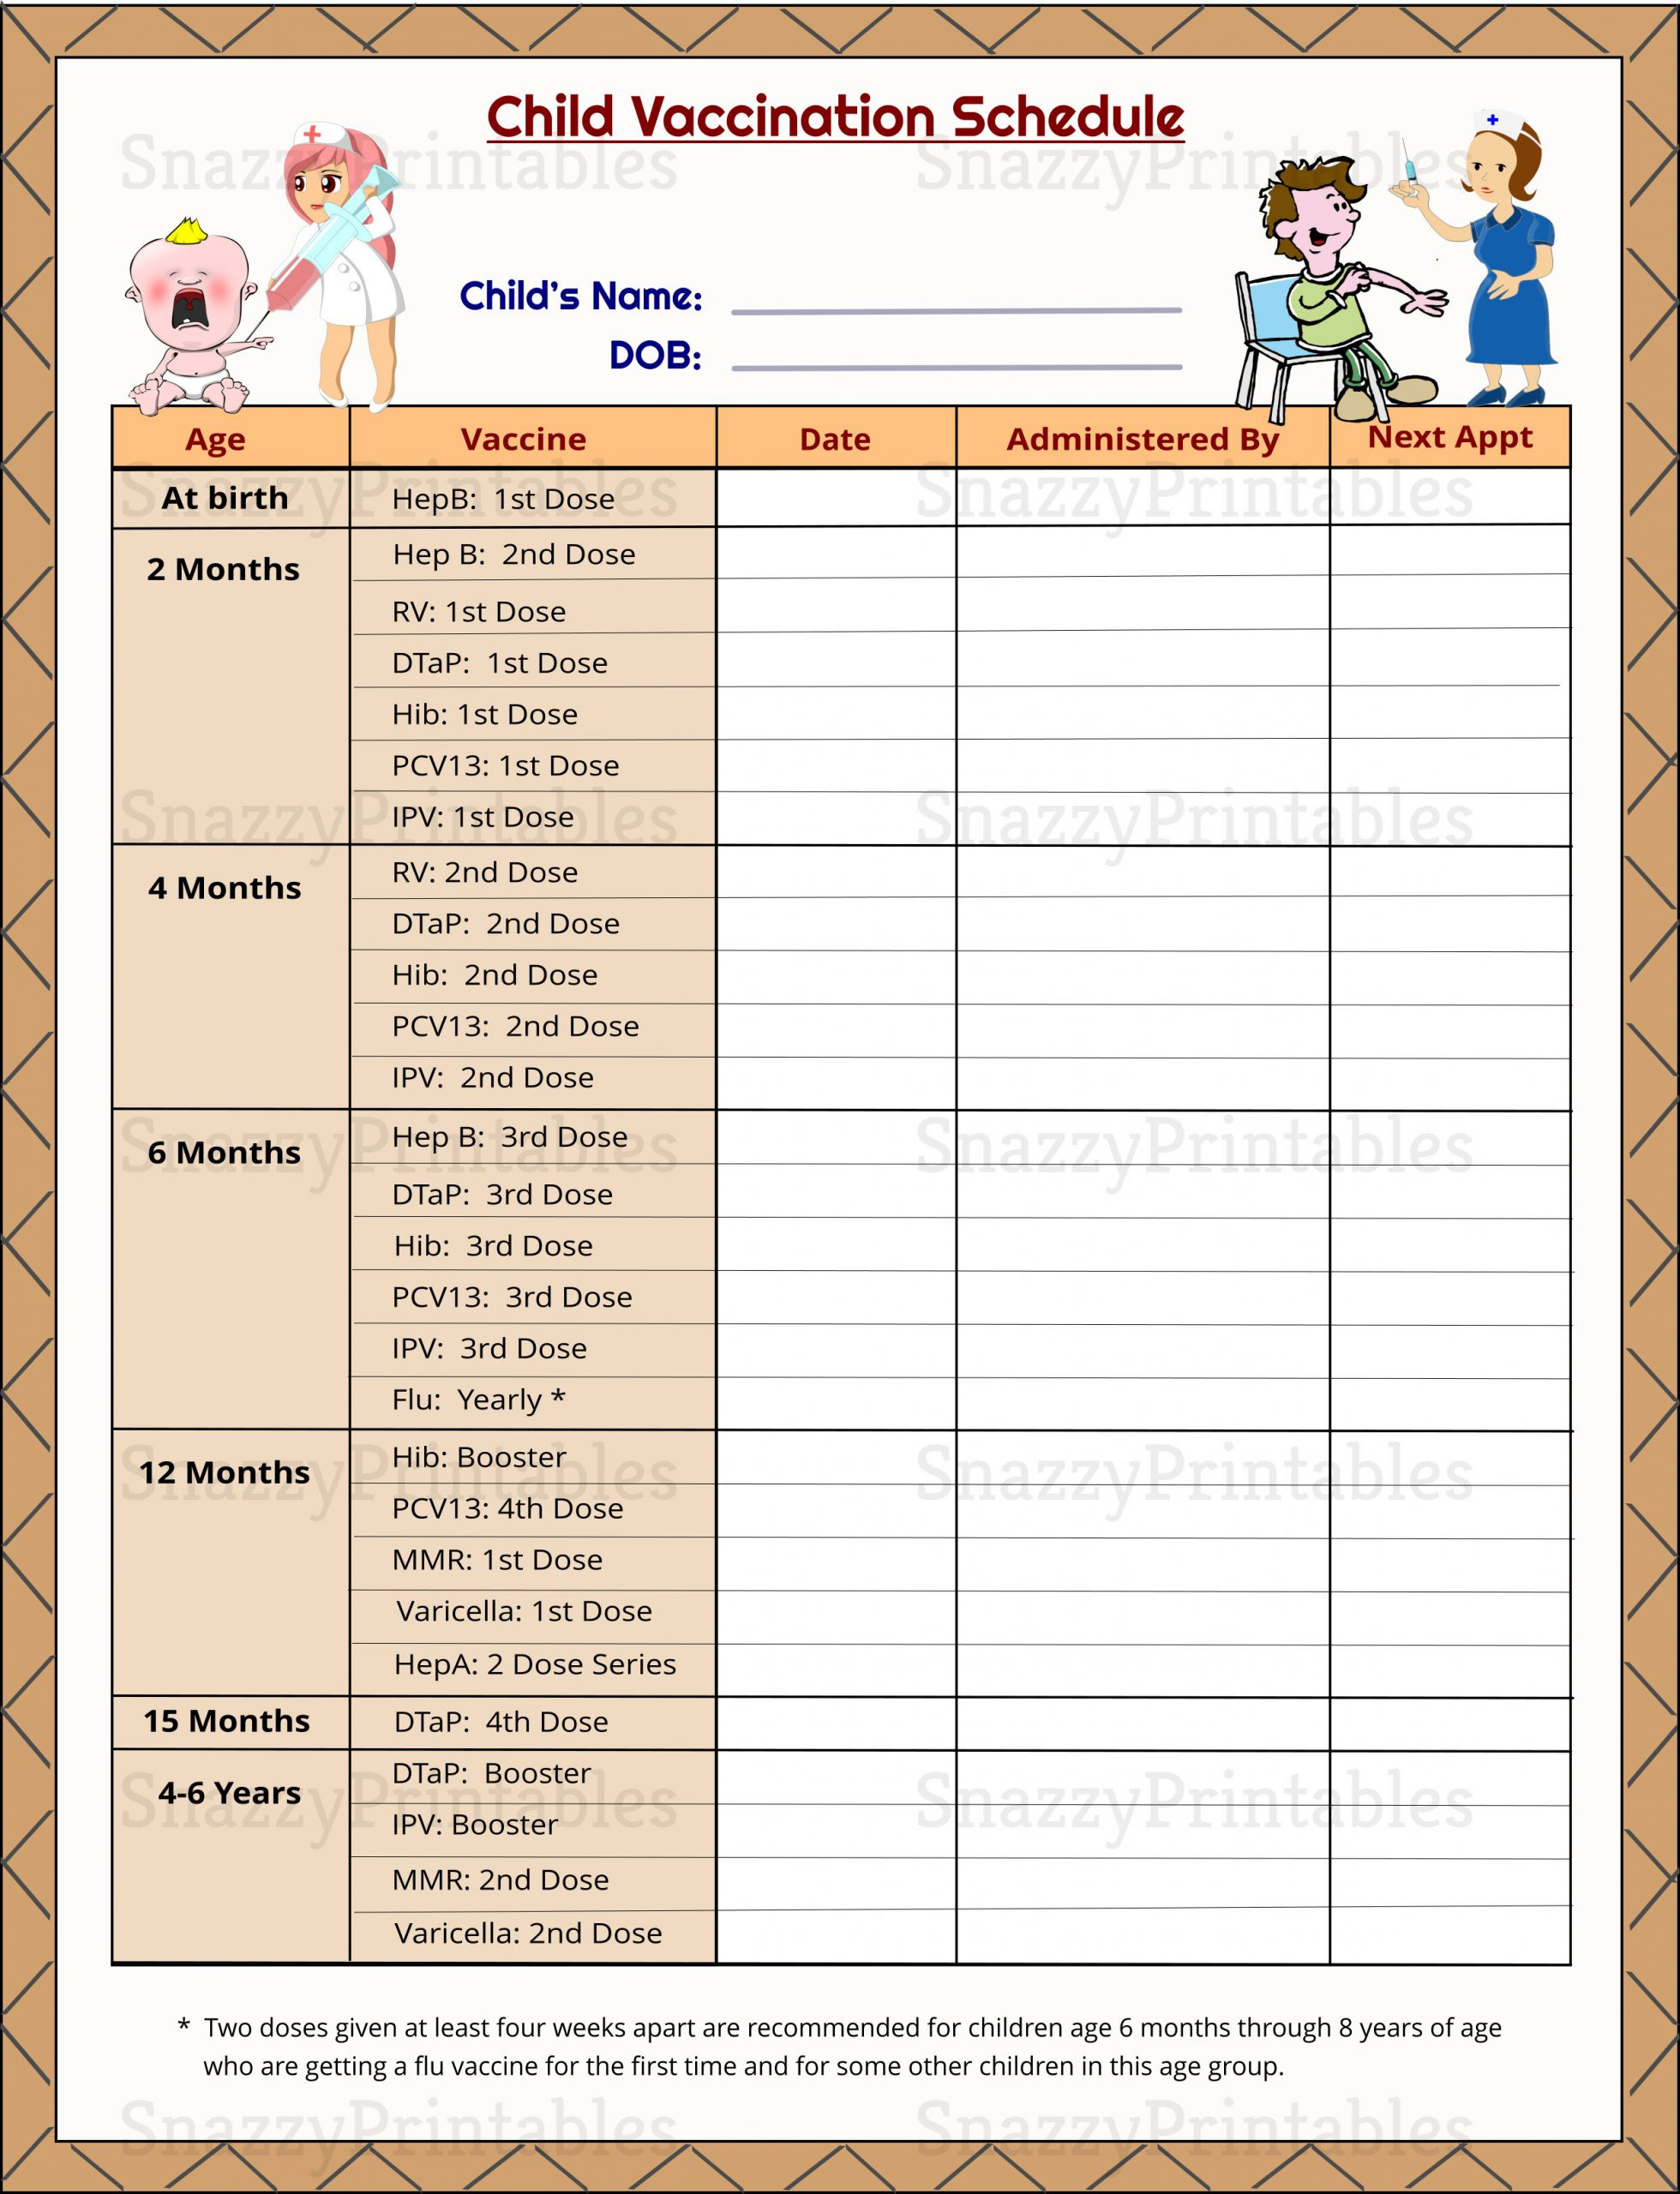 Dog Vaccination Record Template | Simple Template Design inside Vaccine Management Plan Template